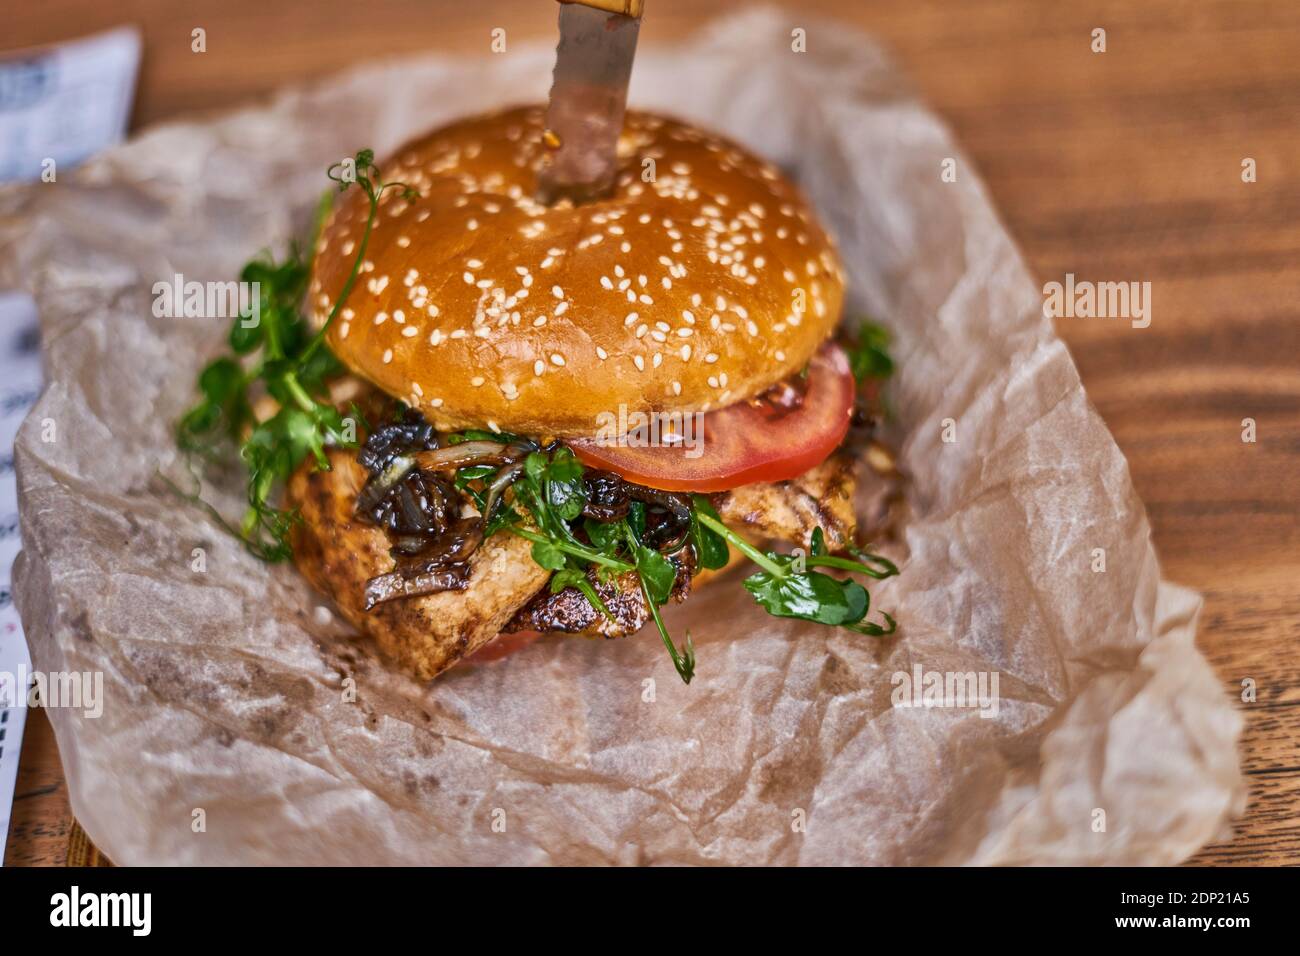 delicious chicken burger On paper and wooden board Stock Photo